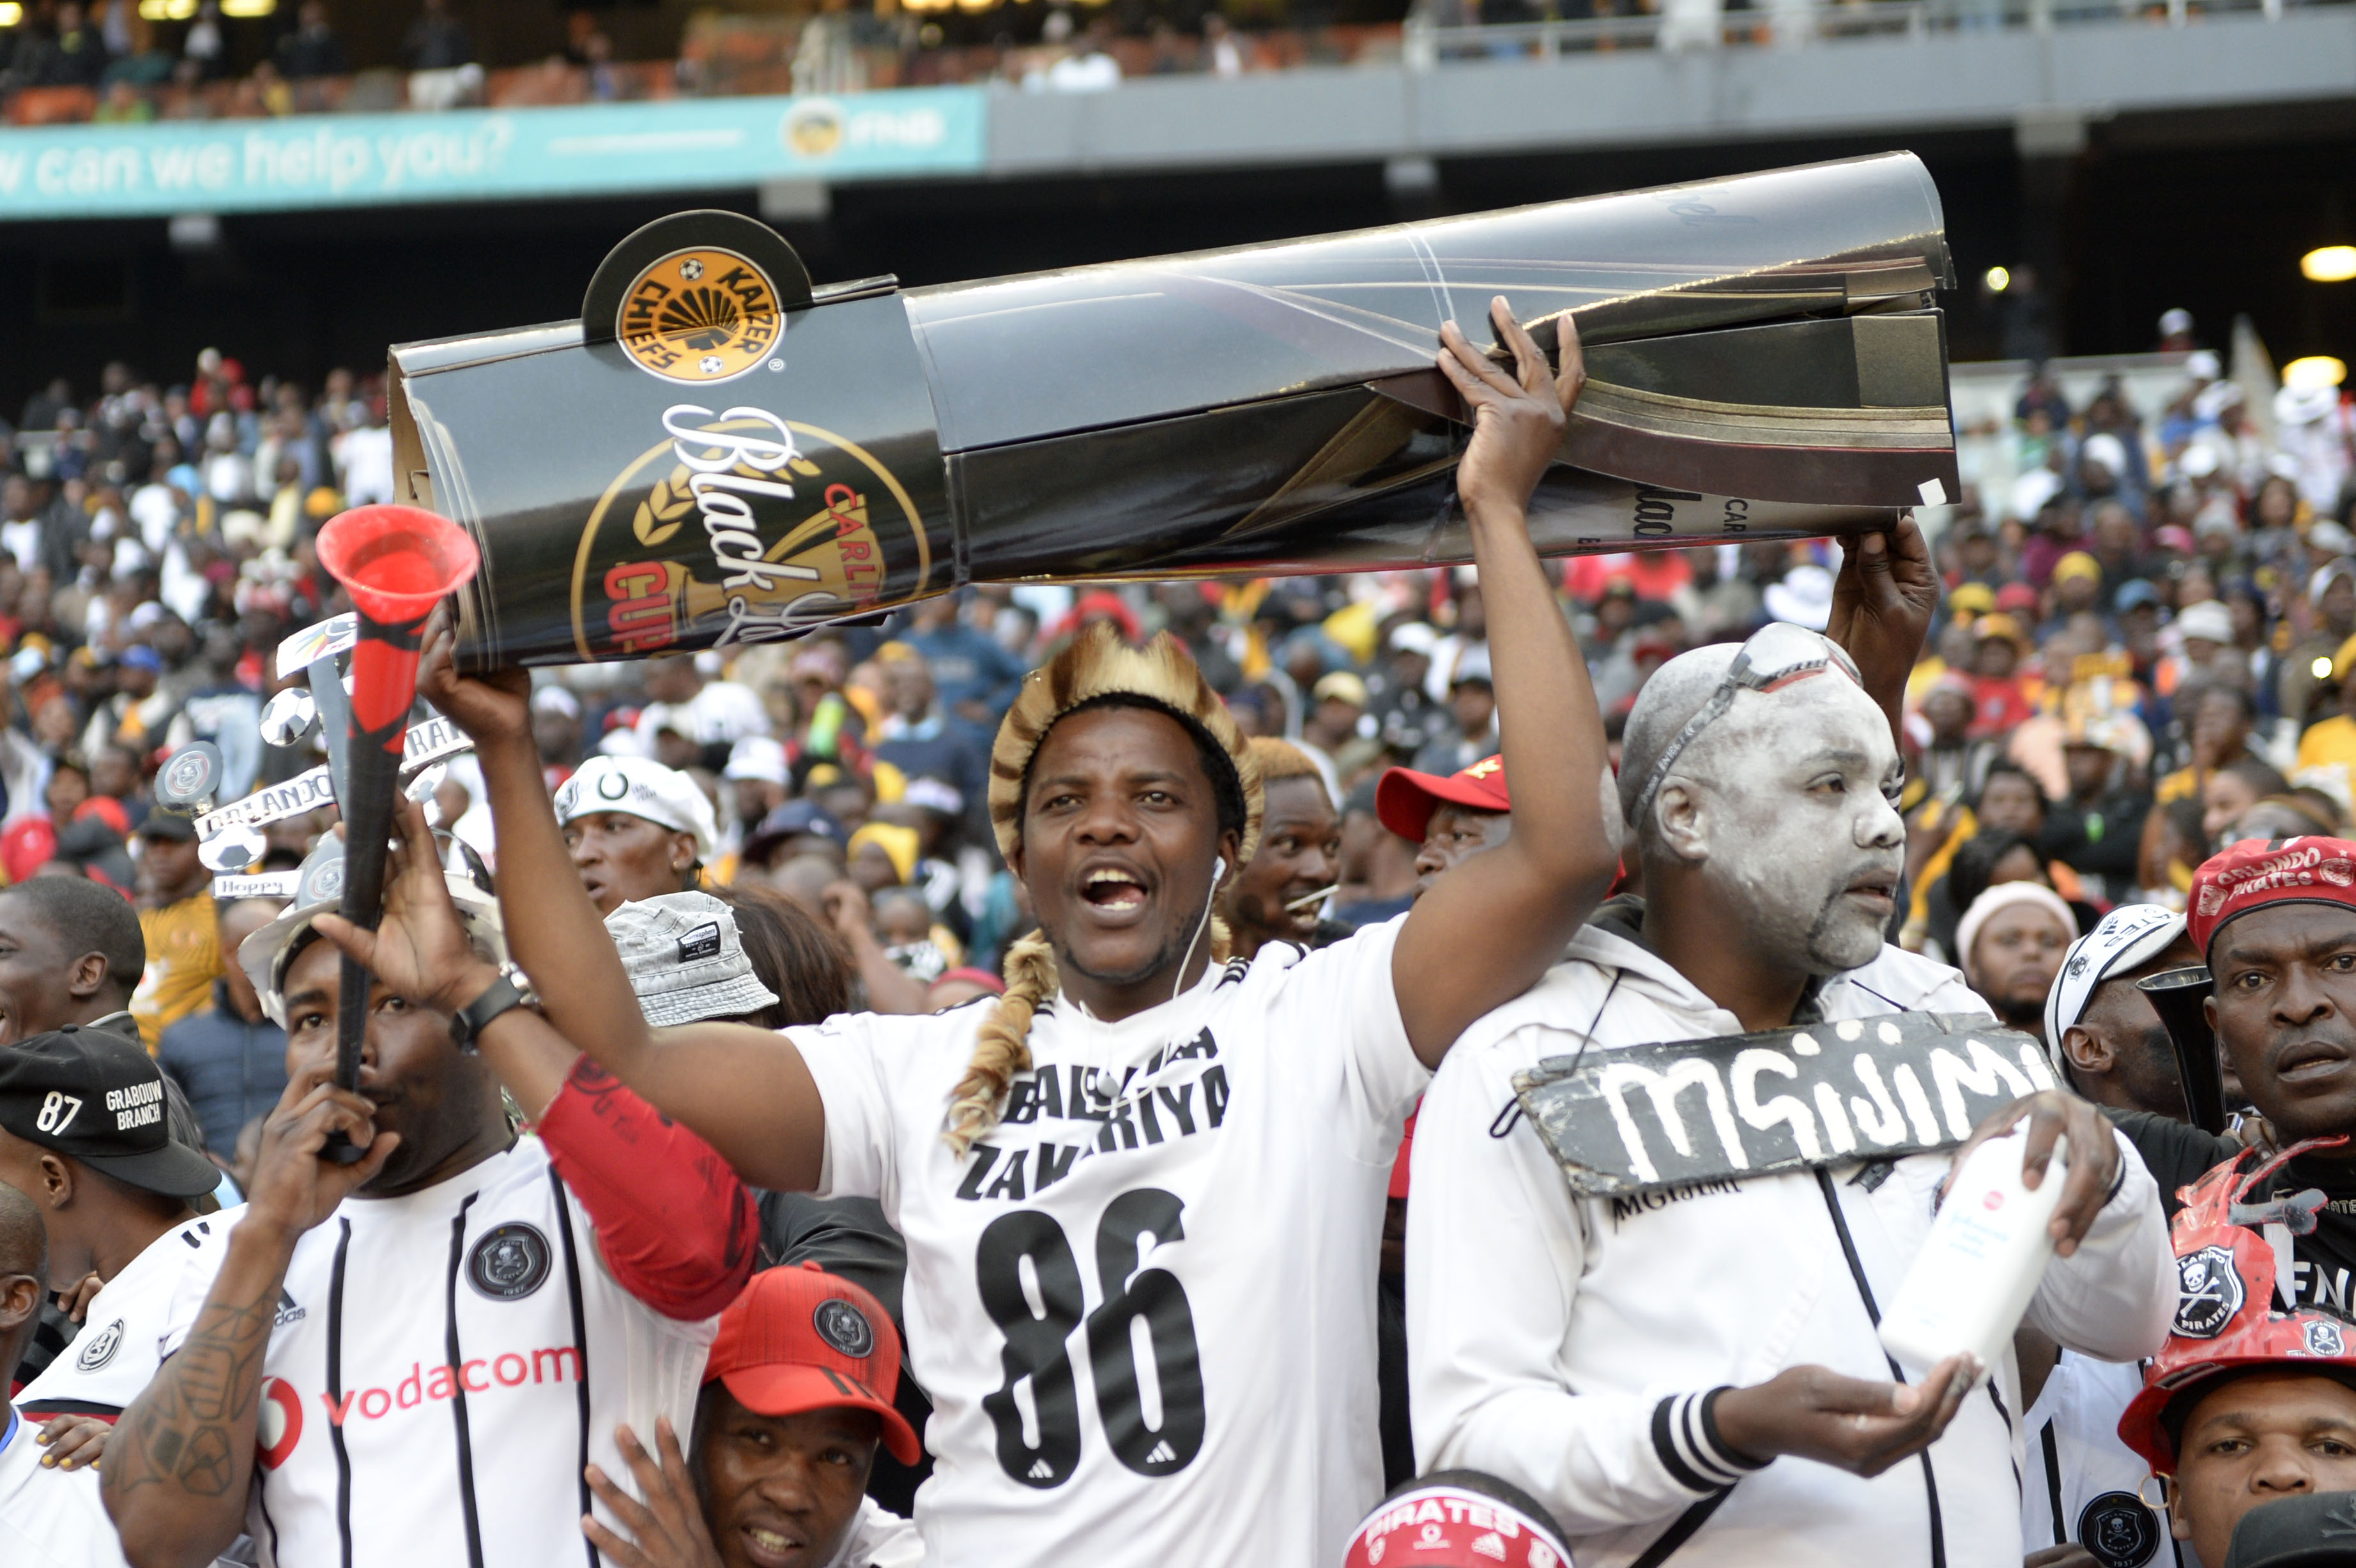 JOHANNESBURG, SOUTH AFRICA - JULY 27: Fans during the Carling Black Label Cup match between Orlando Pirates and Kaizer Chiefs at FNB Stadium on July 27, 2019 in Johannesburg, South Africa. (Photo by Lee Warren/Gallo Images/Getty Images)